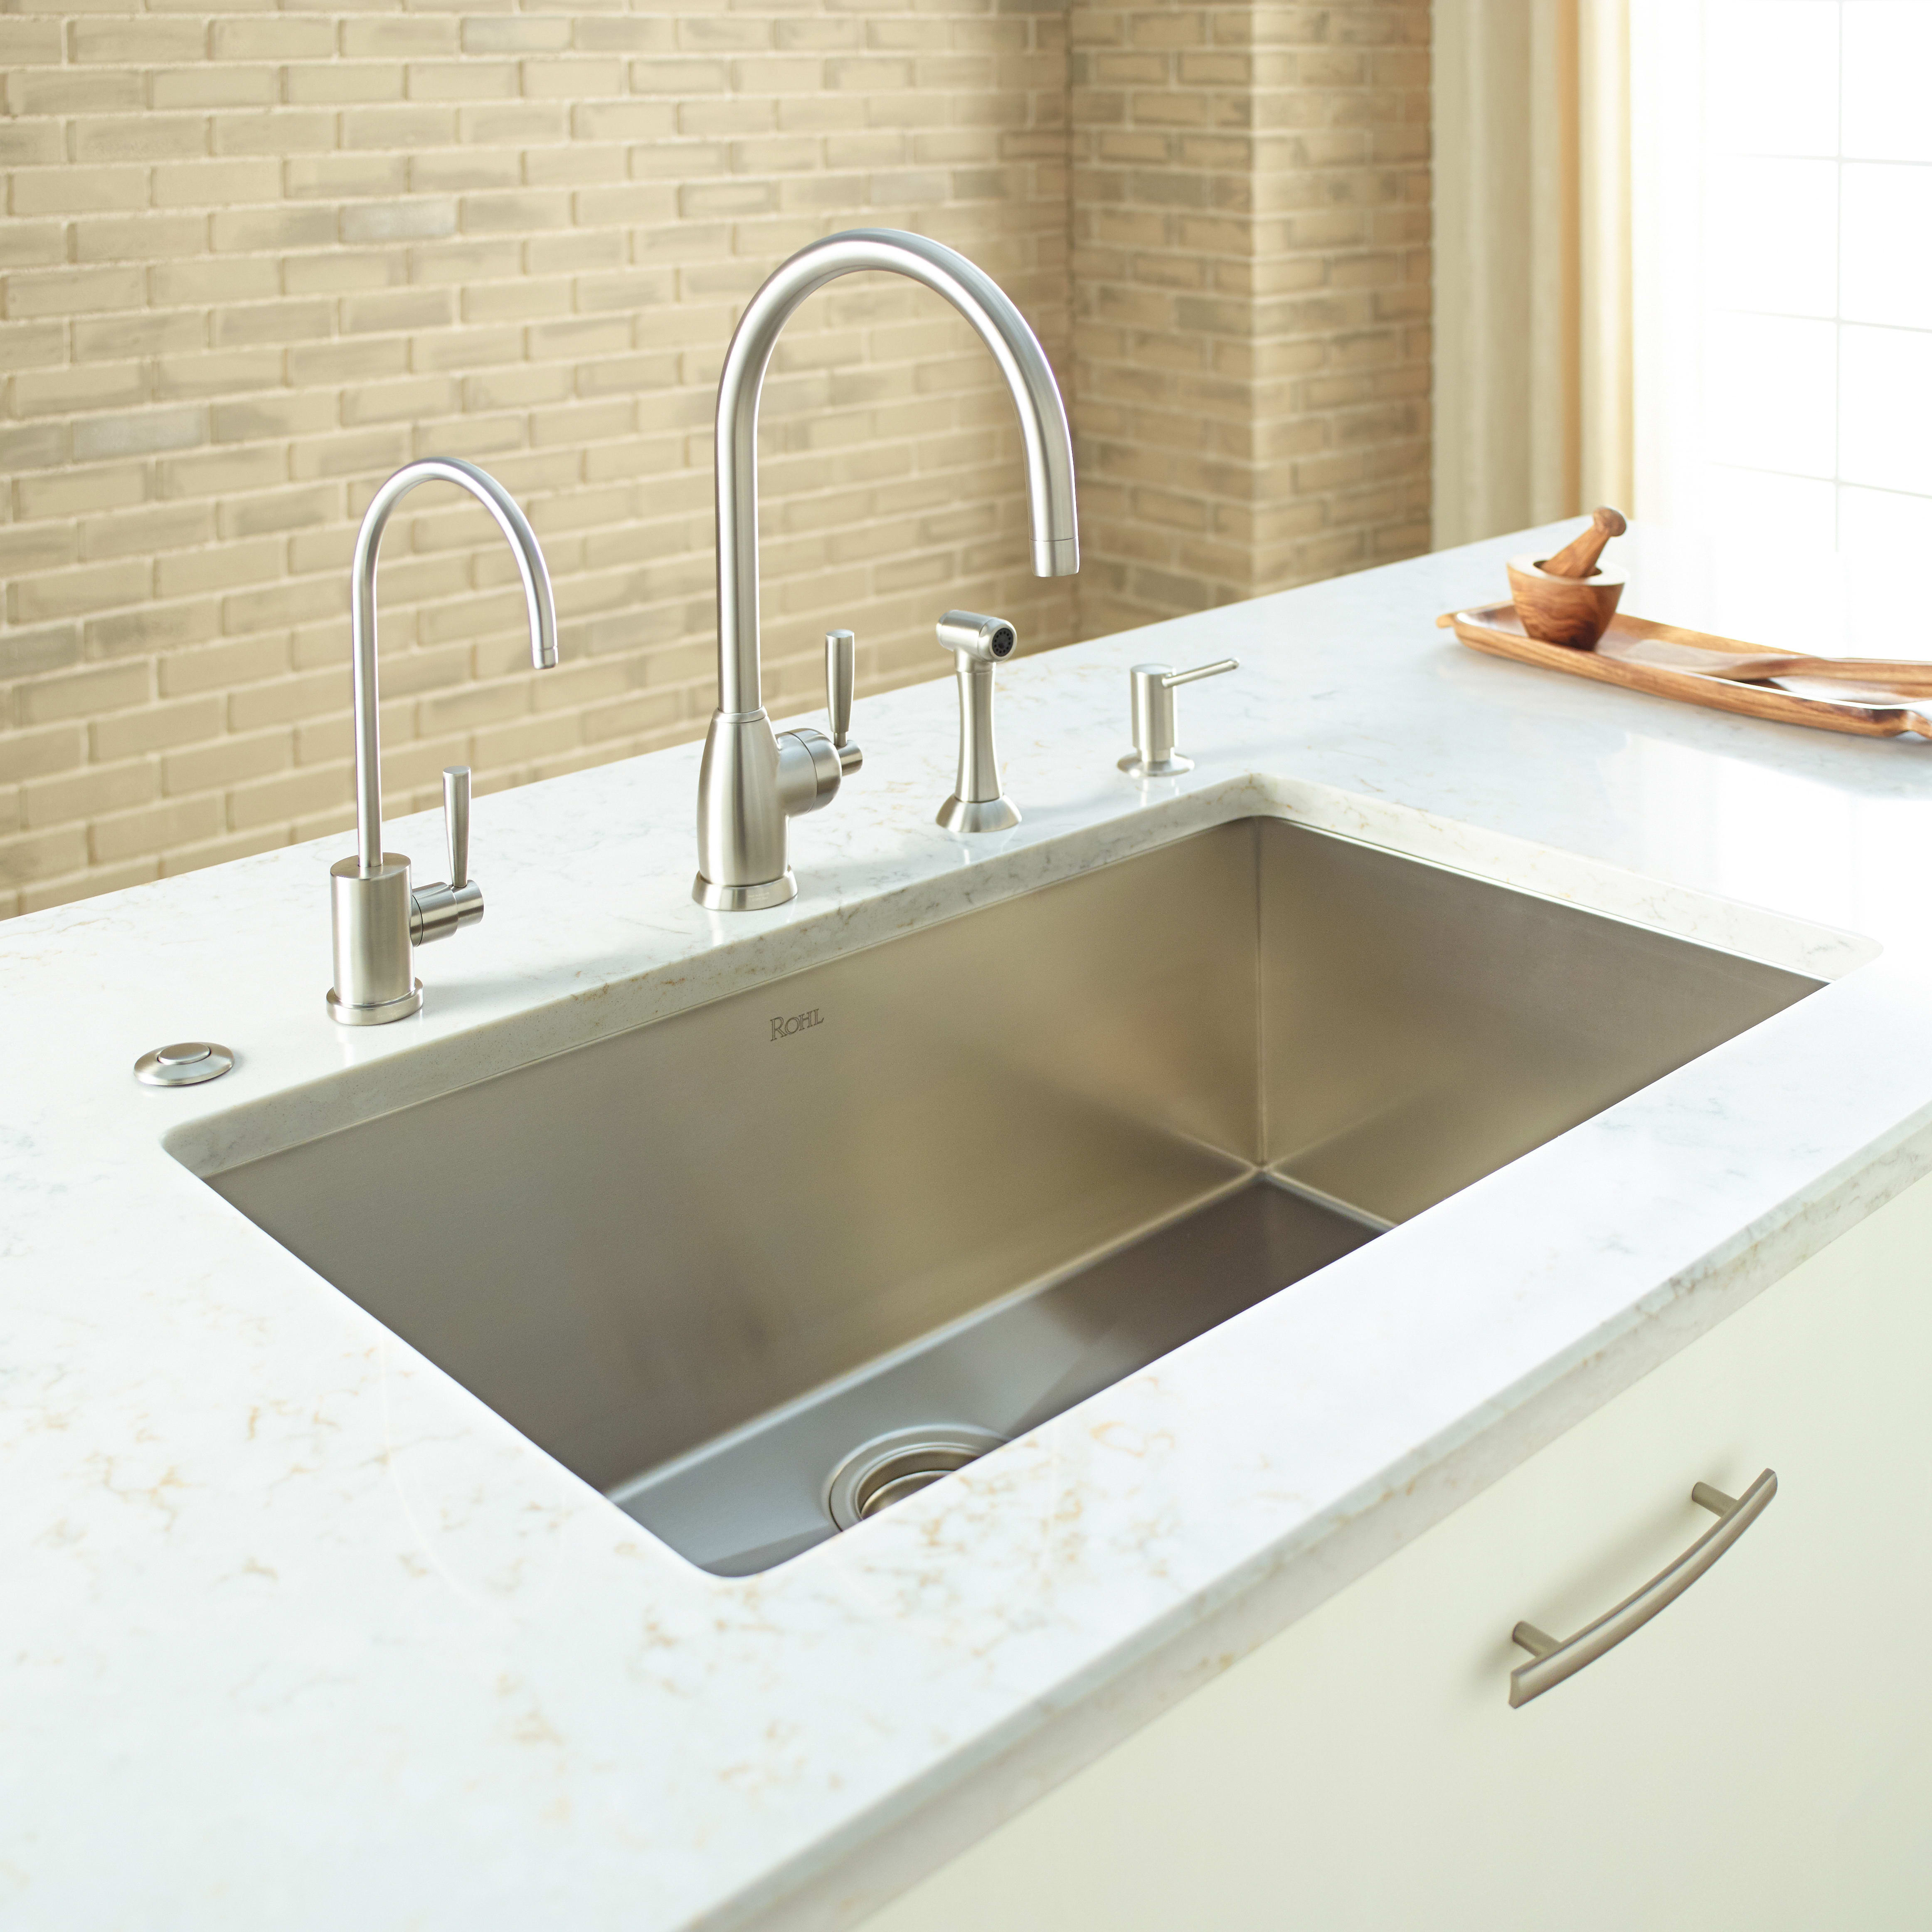 Rohl U.4846LS Perrin  Rowe Holborn Contemporary Single Hole Kitchen Faucet  With "C" Spout And Sidespray